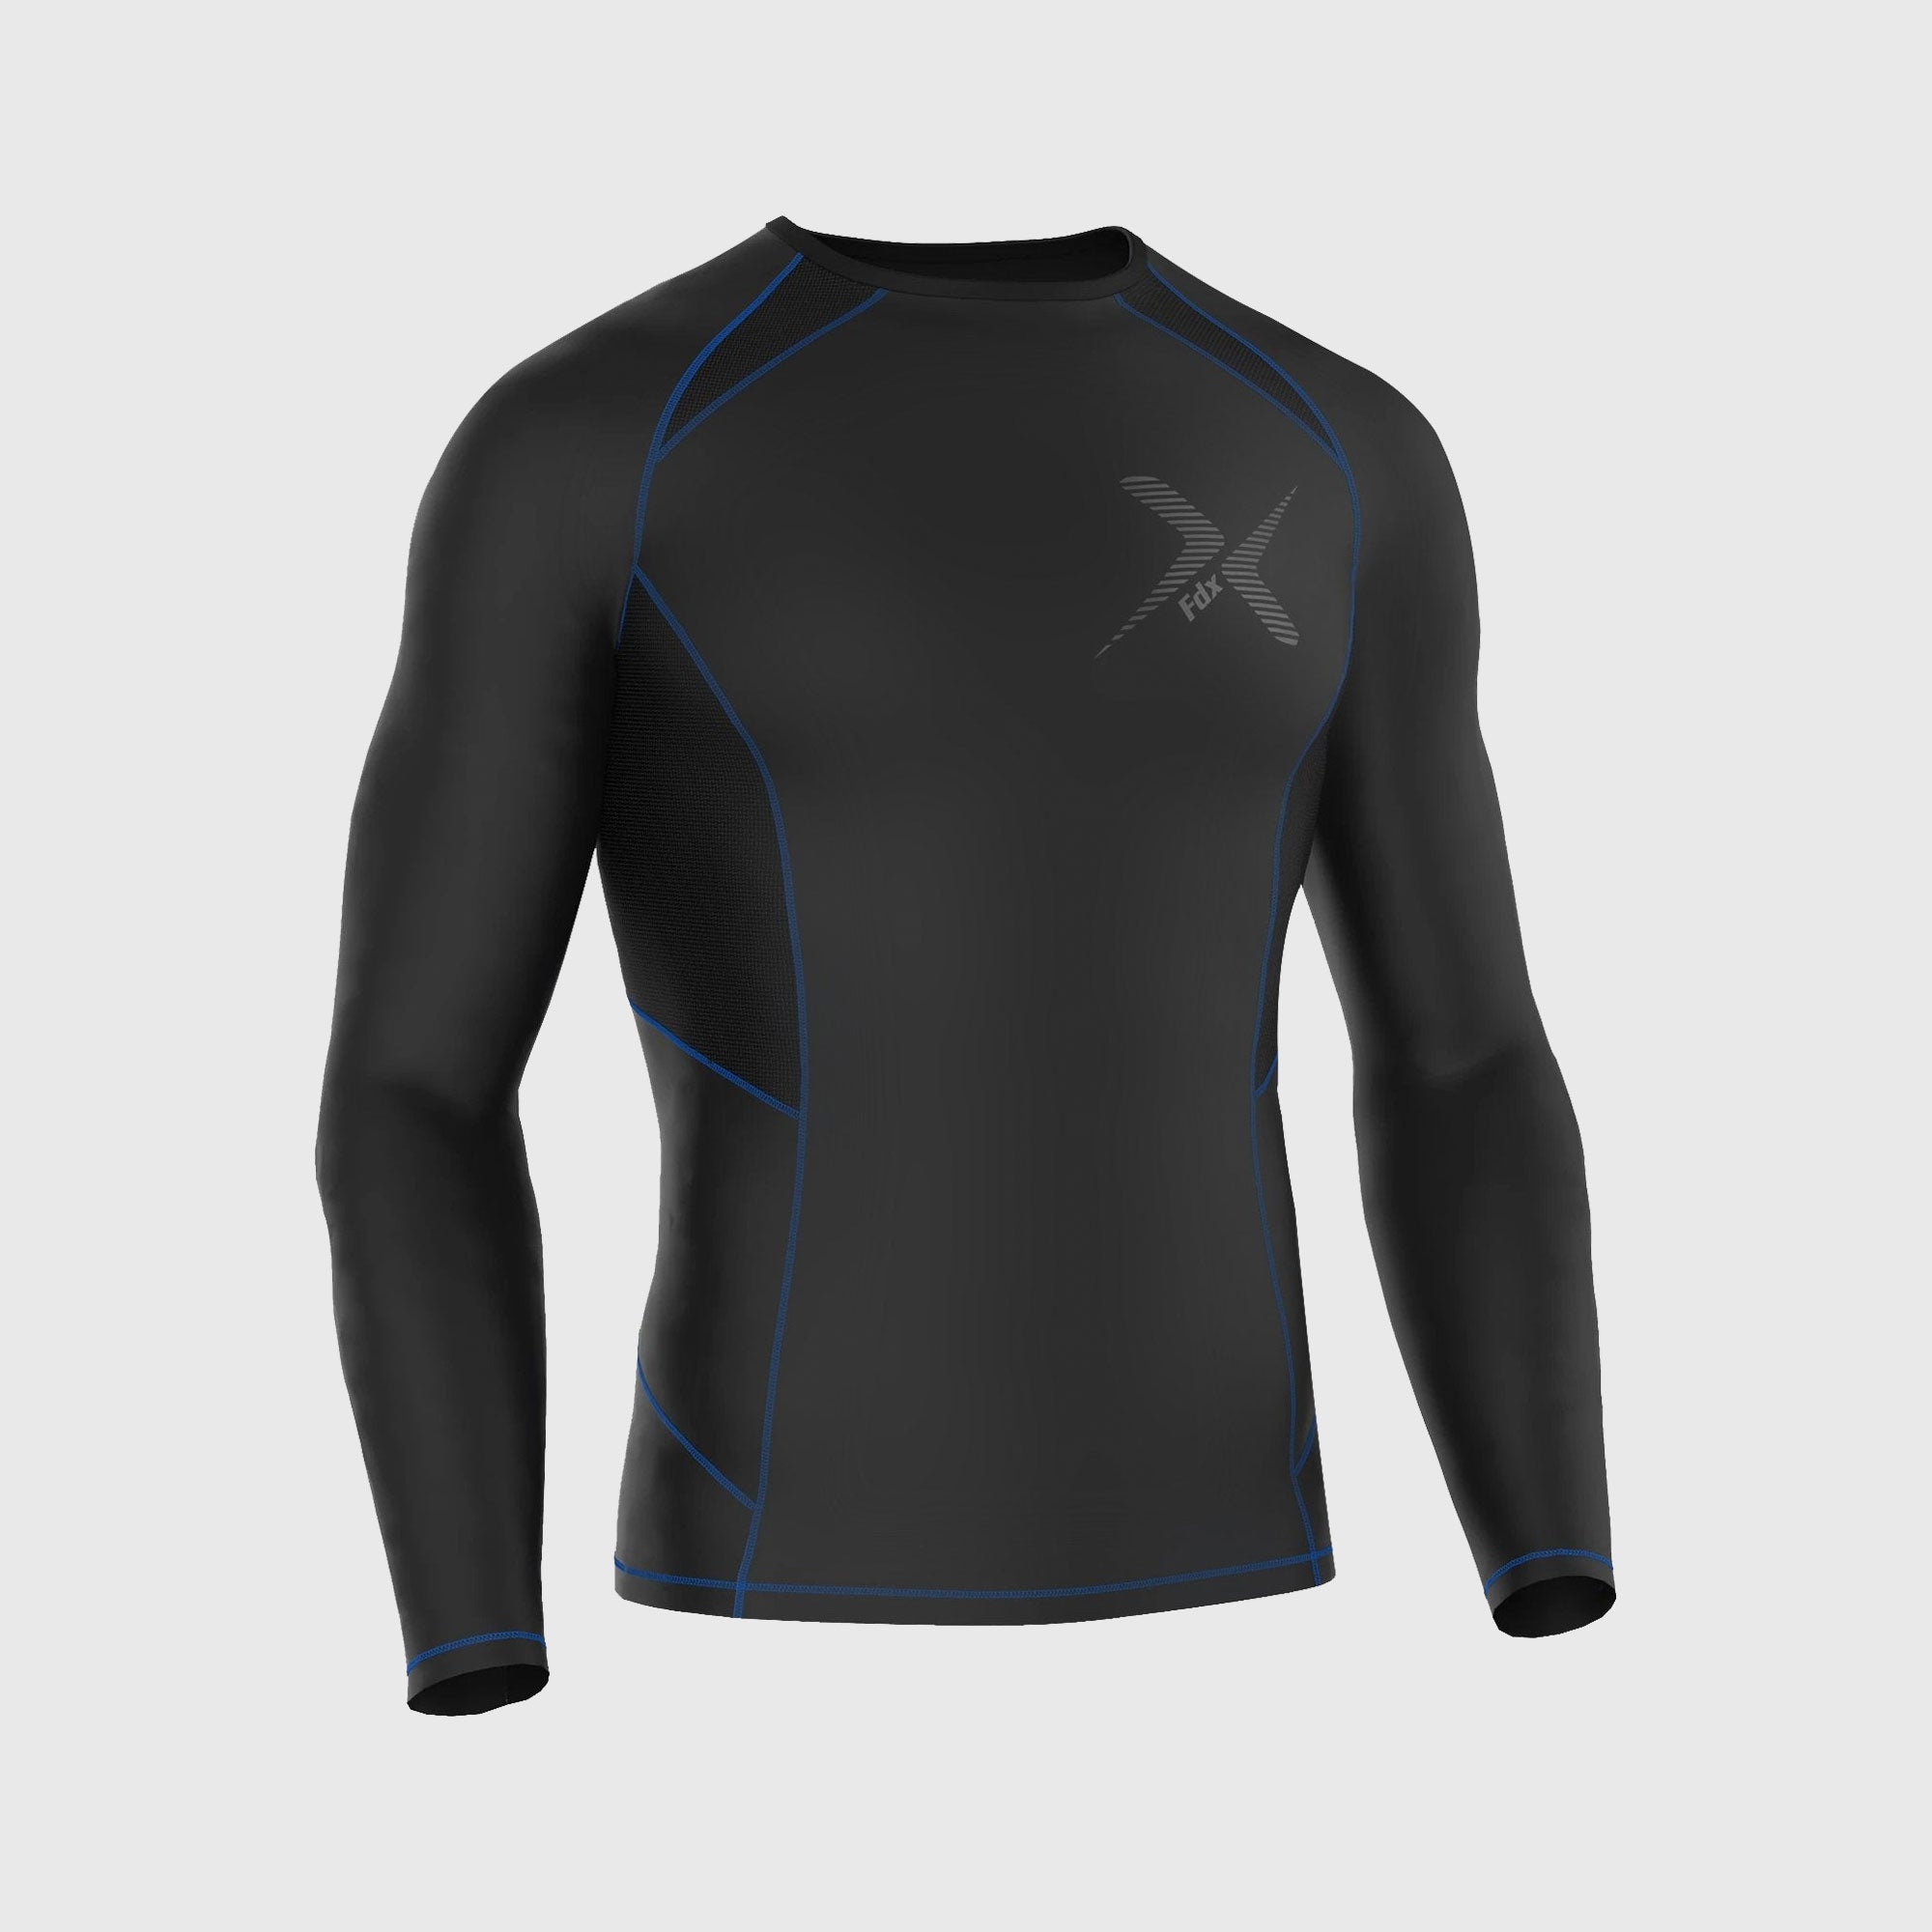 Fdx Recoil Men's Full Sleeves Thermal Base Layer Top Blue